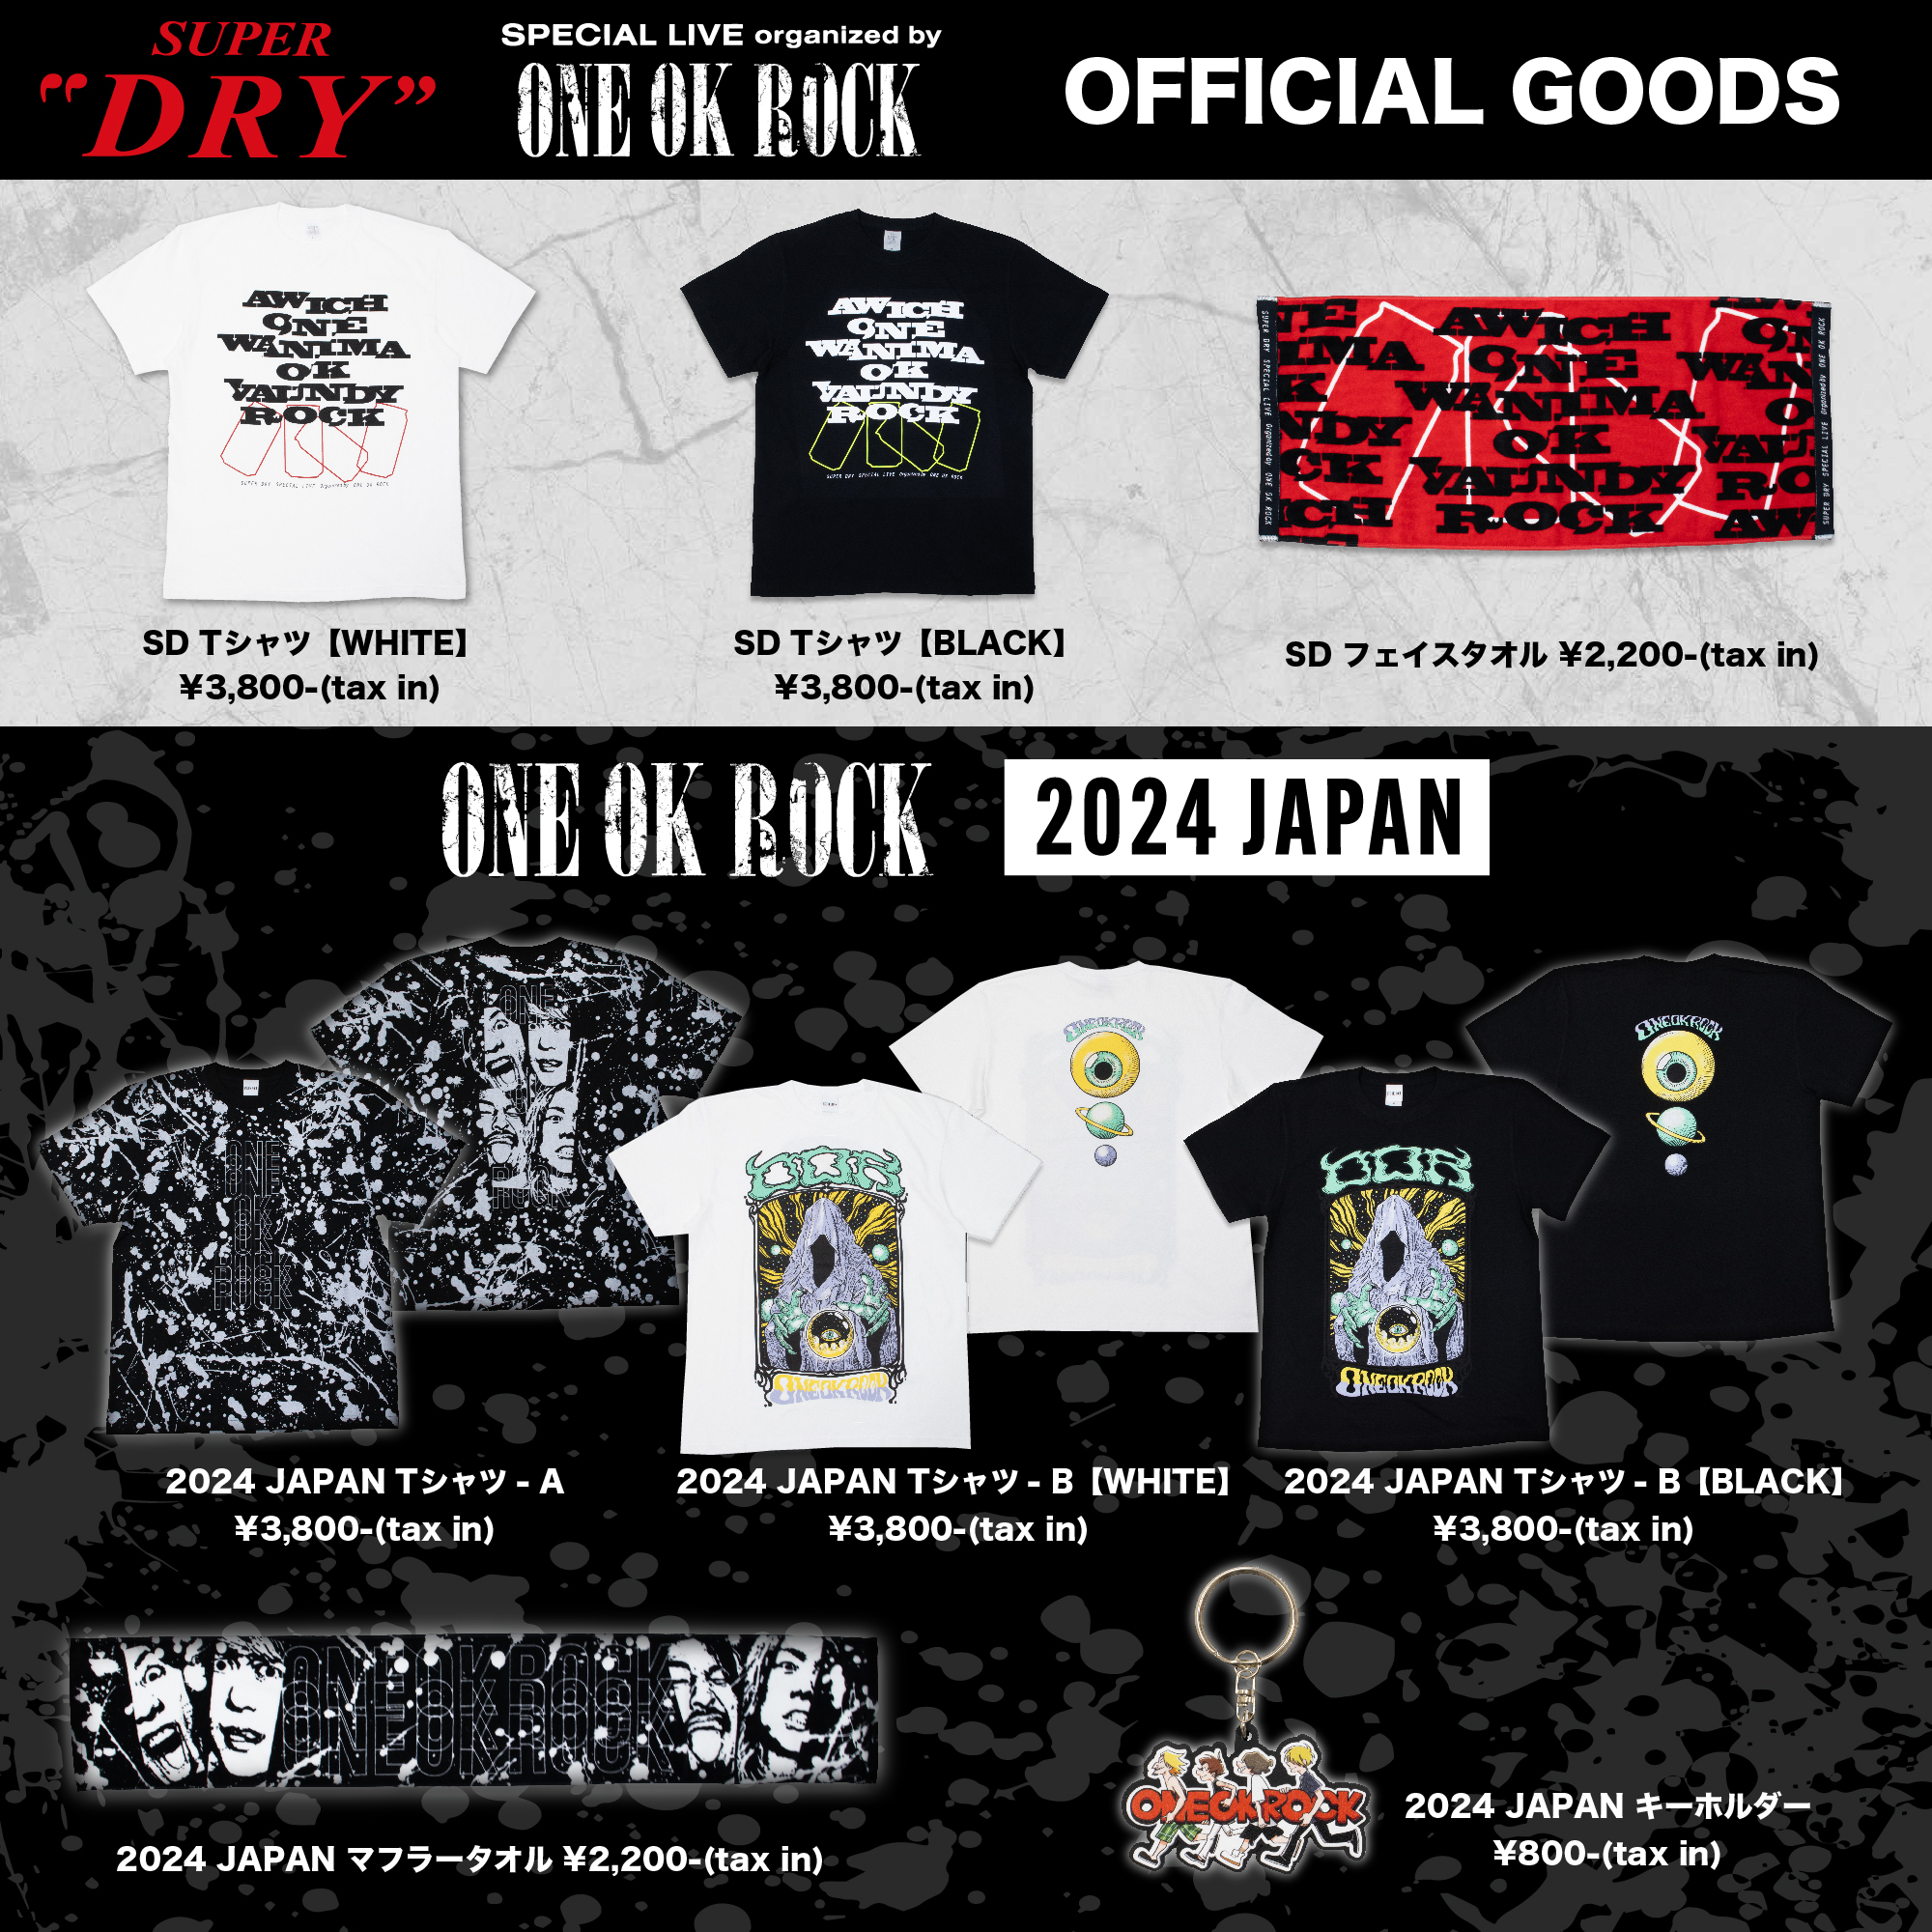 SUPER DRY SPECIAL LIVE Organized by ONE OK ROCK』グッズ通信販売 